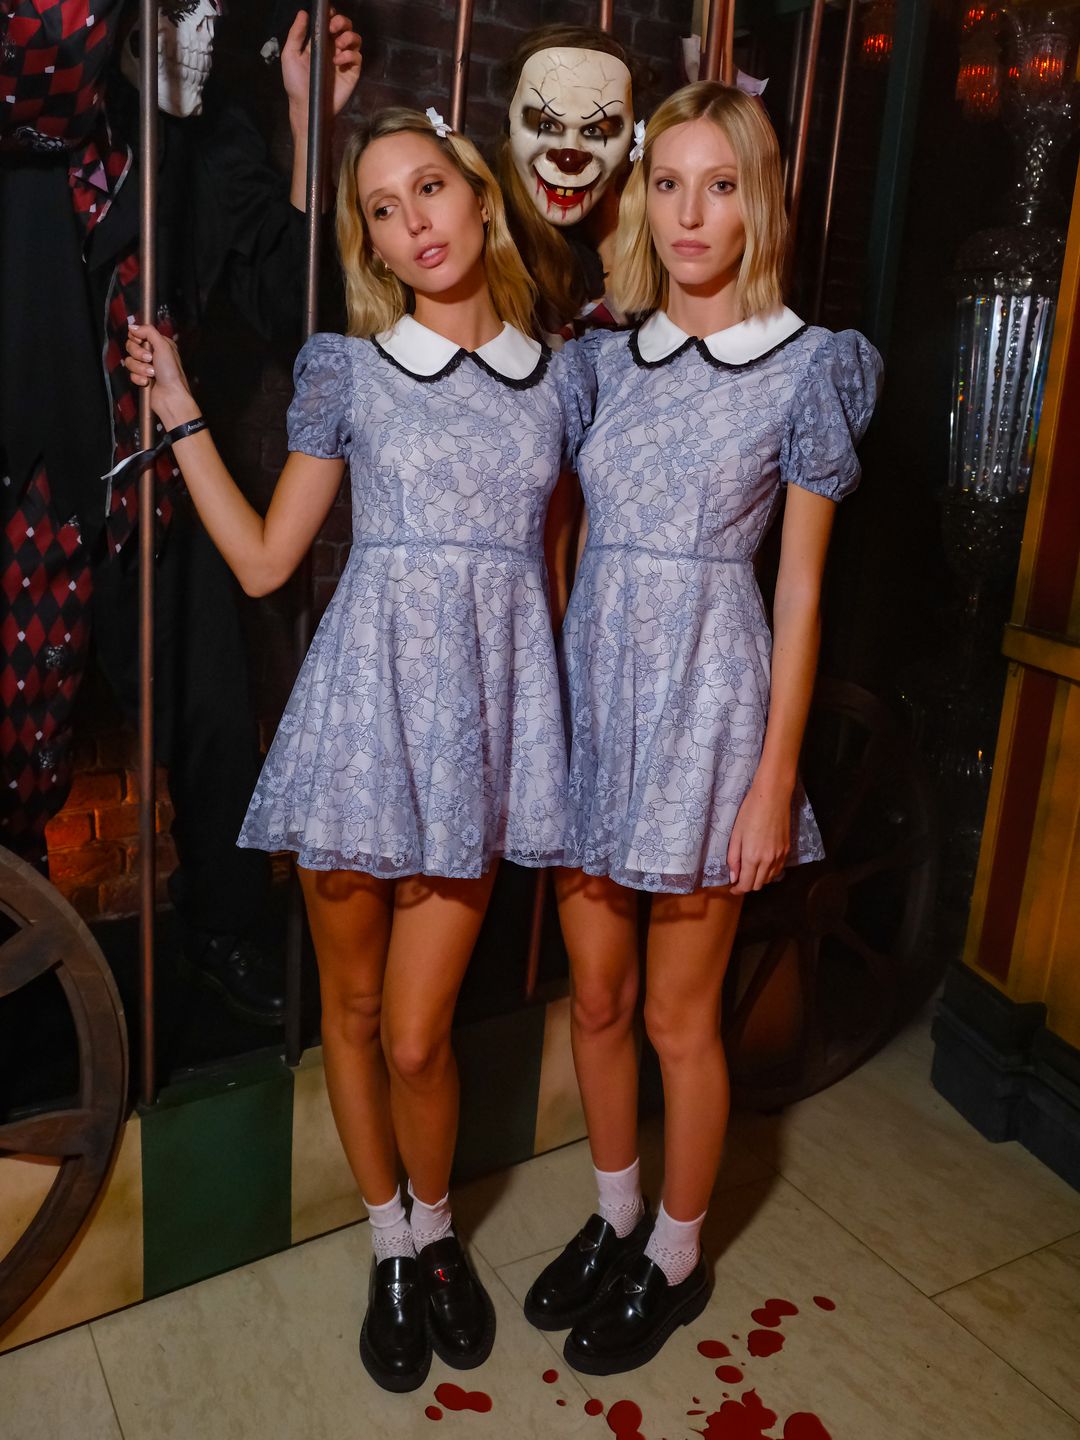 Princess Maria-Olympia of Greece and Denmark and Ella Richards dressed as the creepy twins from The Shining